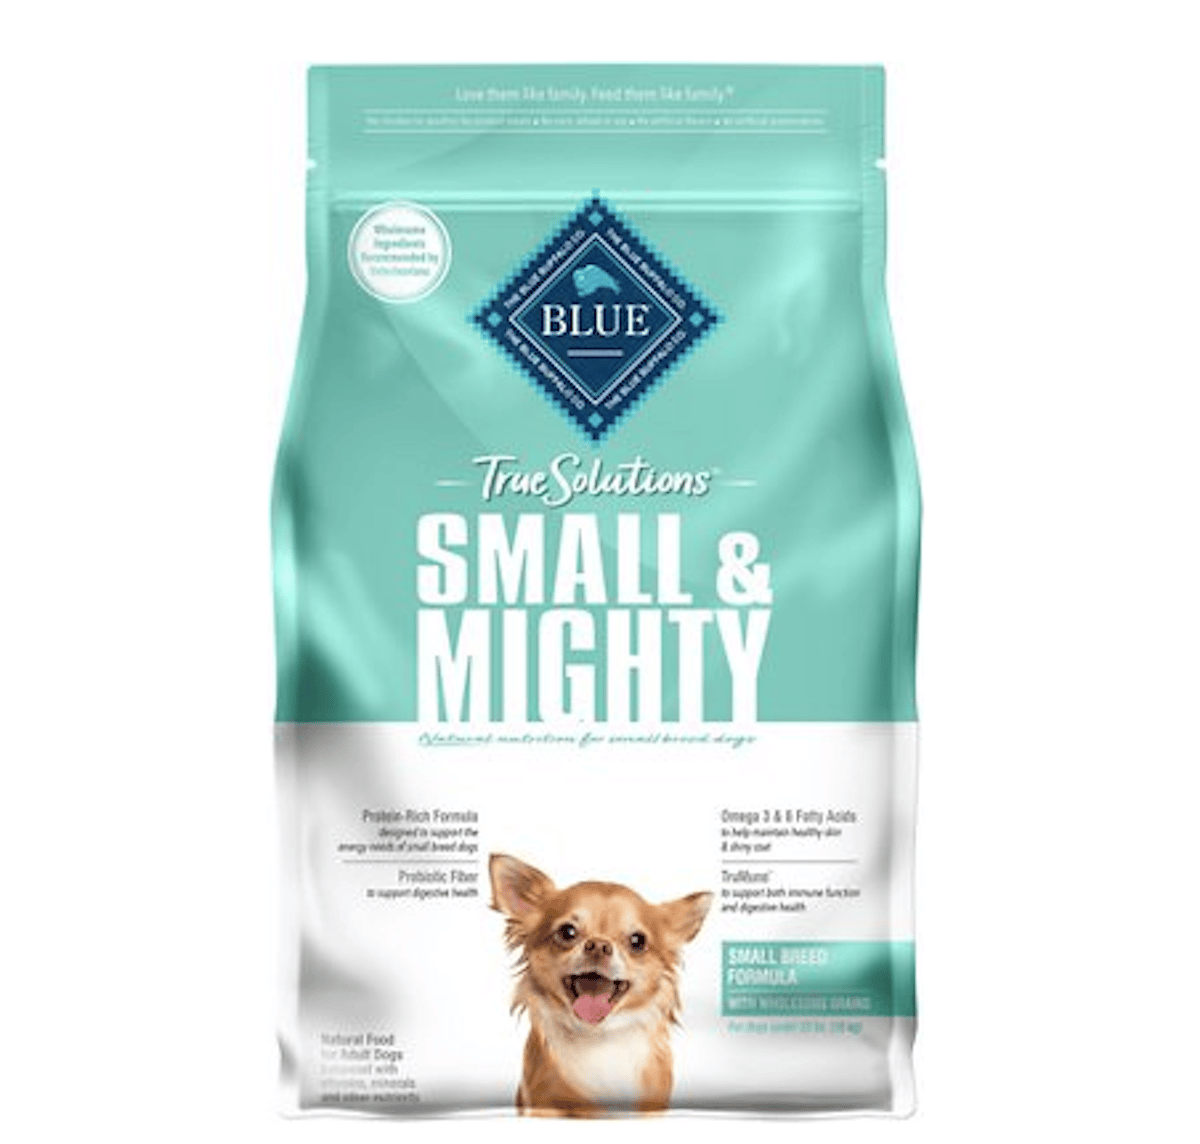 The 6 Best Dog Foods for Small Dog Breeds in 2021